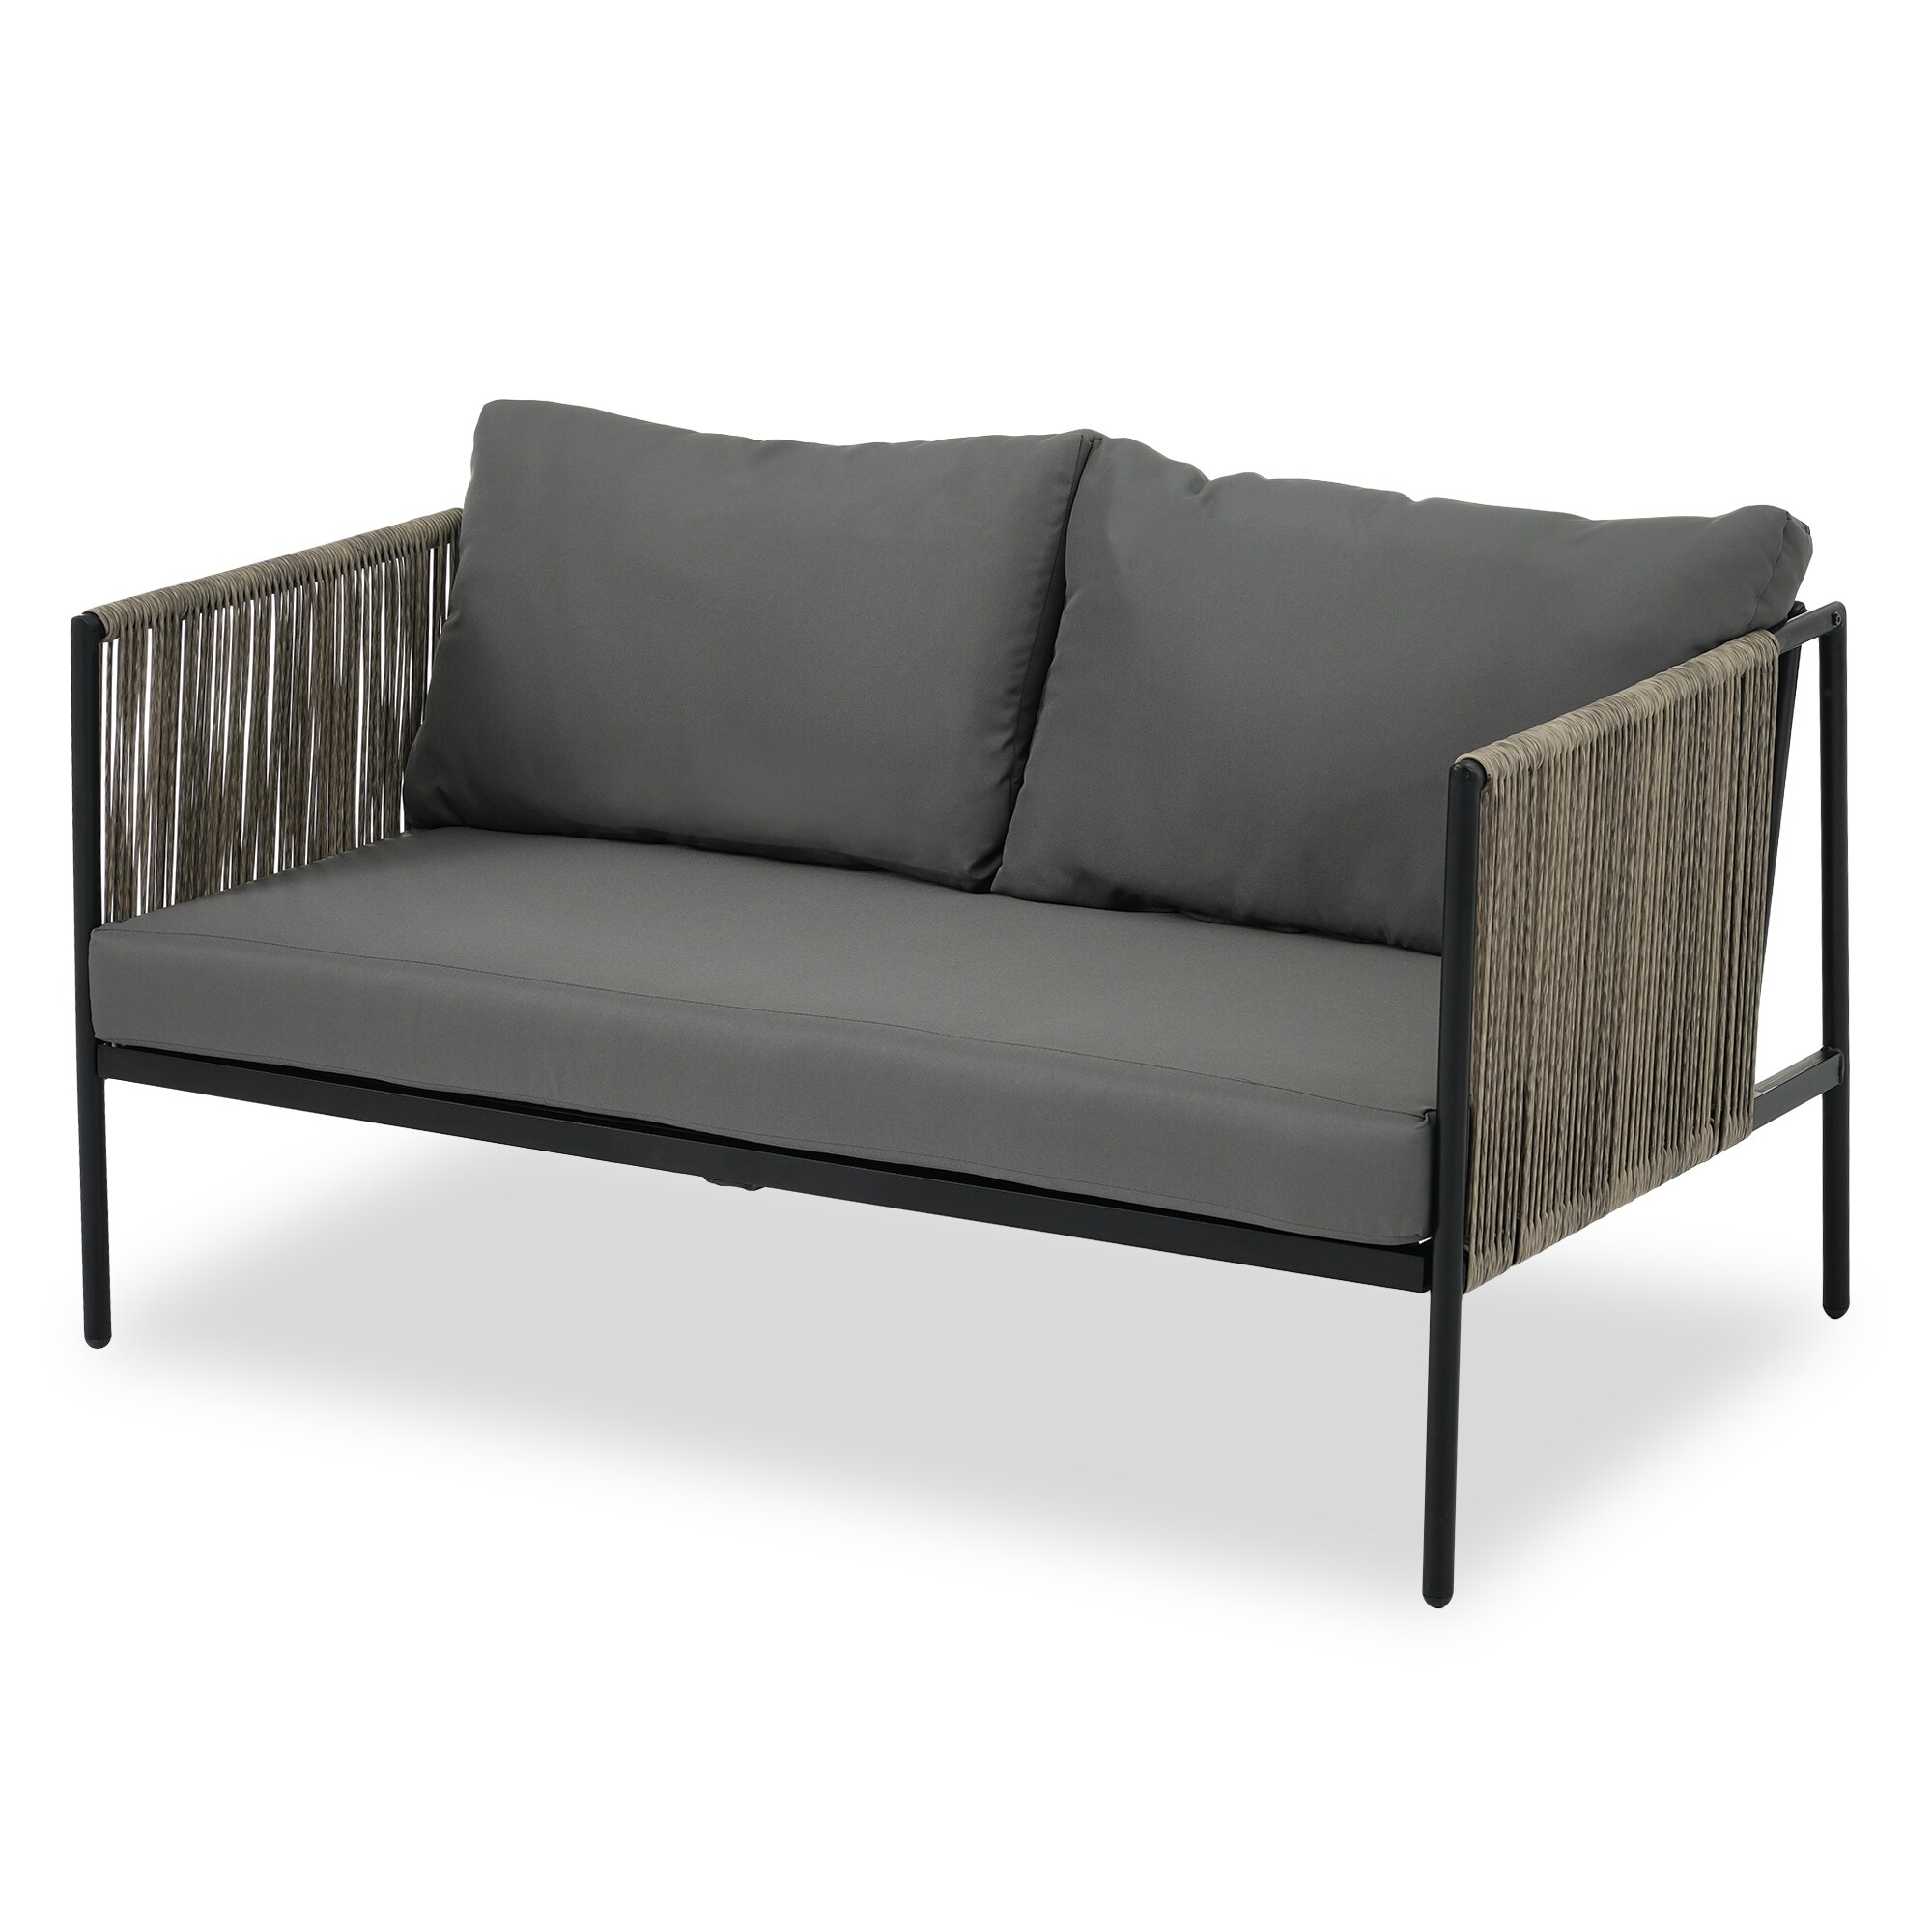 New Heights Huxley Woven Rope Outdoor Loveseat - Bed Bath & Beyond